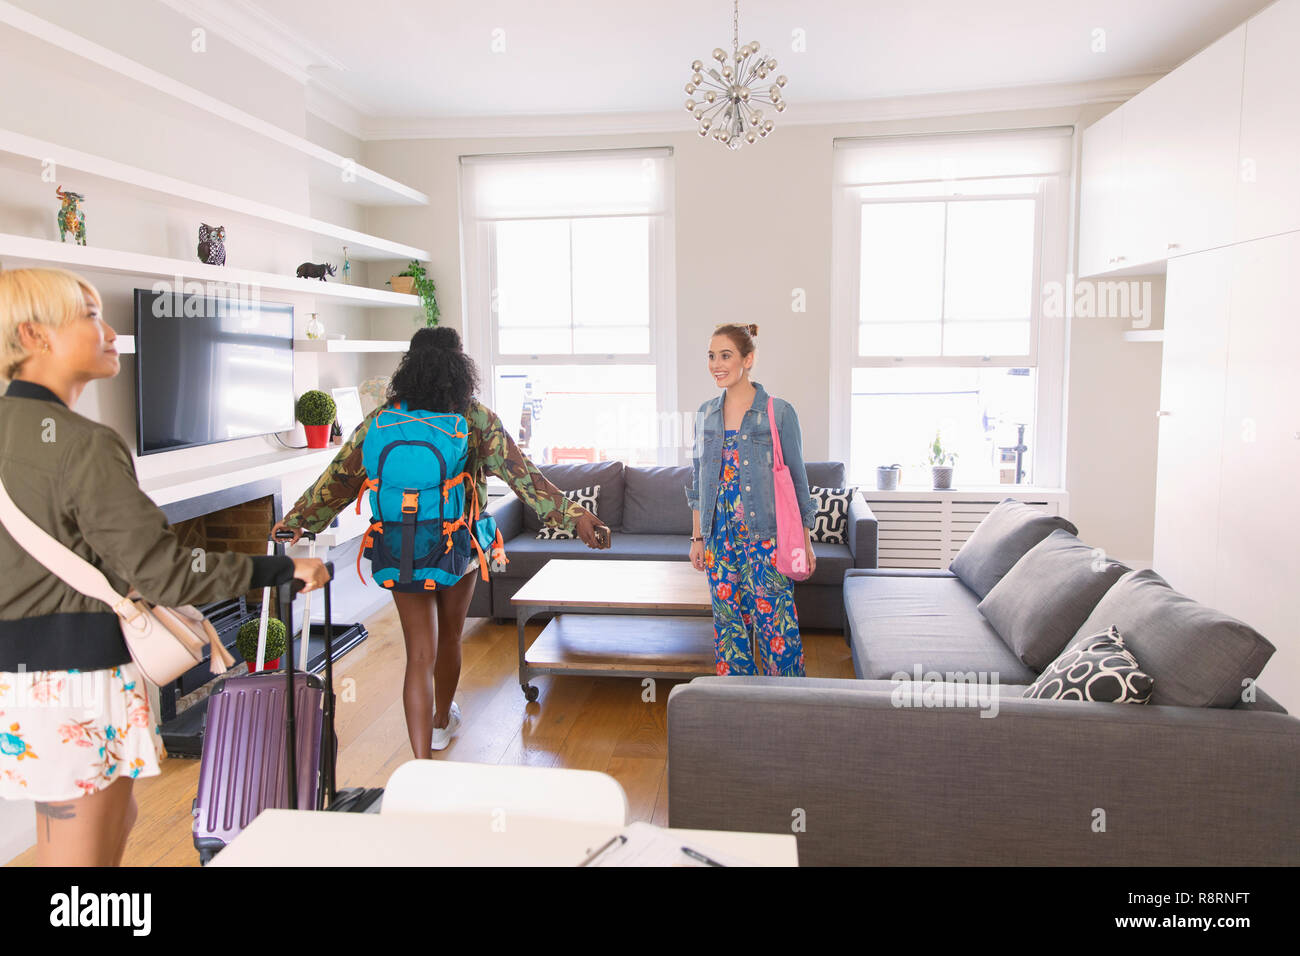 Young women friends with suitcases arriving at house rental Stock Photo